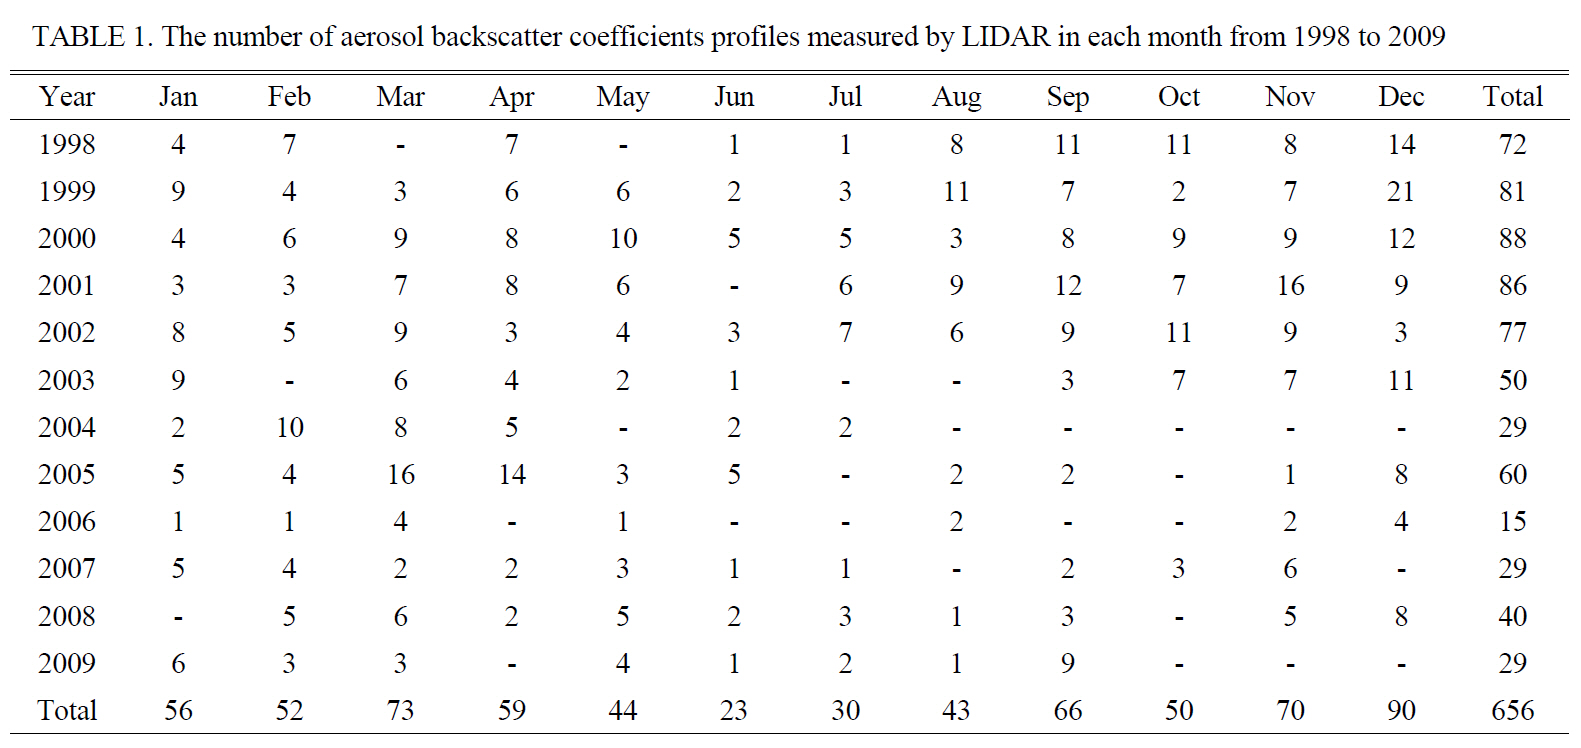 The number of aerosol backscatter coefficients profiles measured by LIDAR in each month from 1998 to 2009